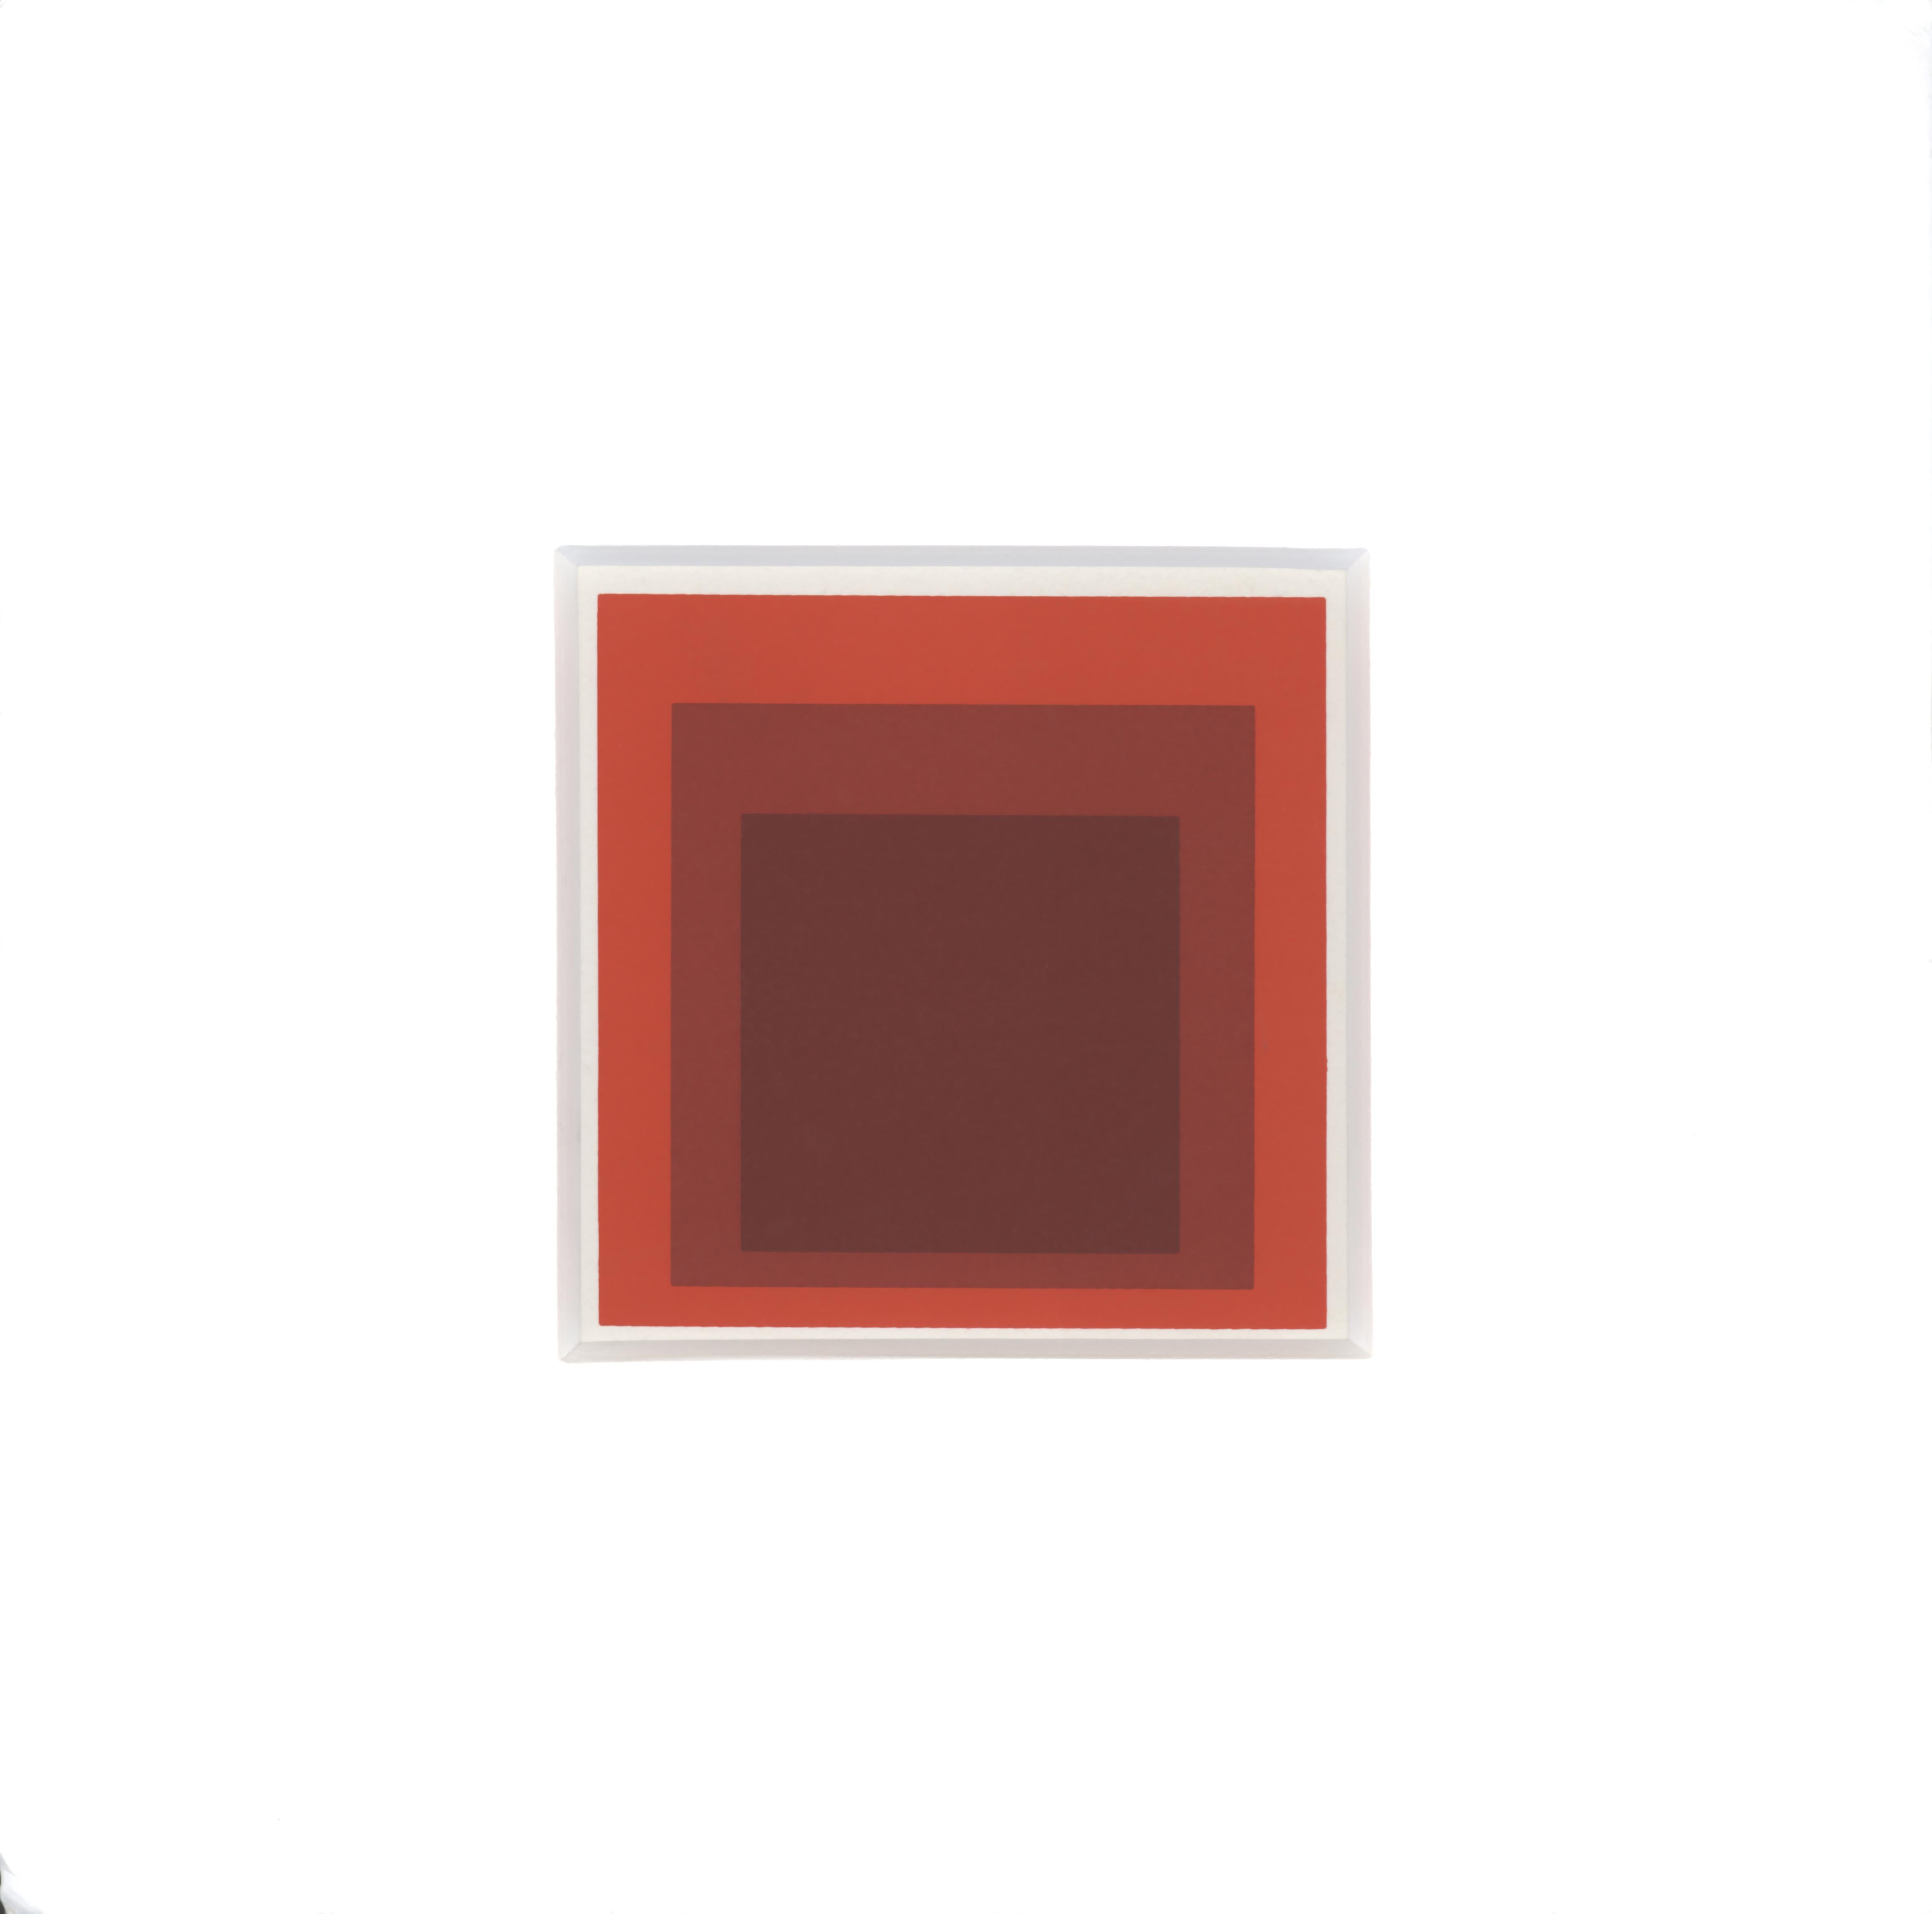 Josef Albers Abstract Print - Homage to the Square in Reds